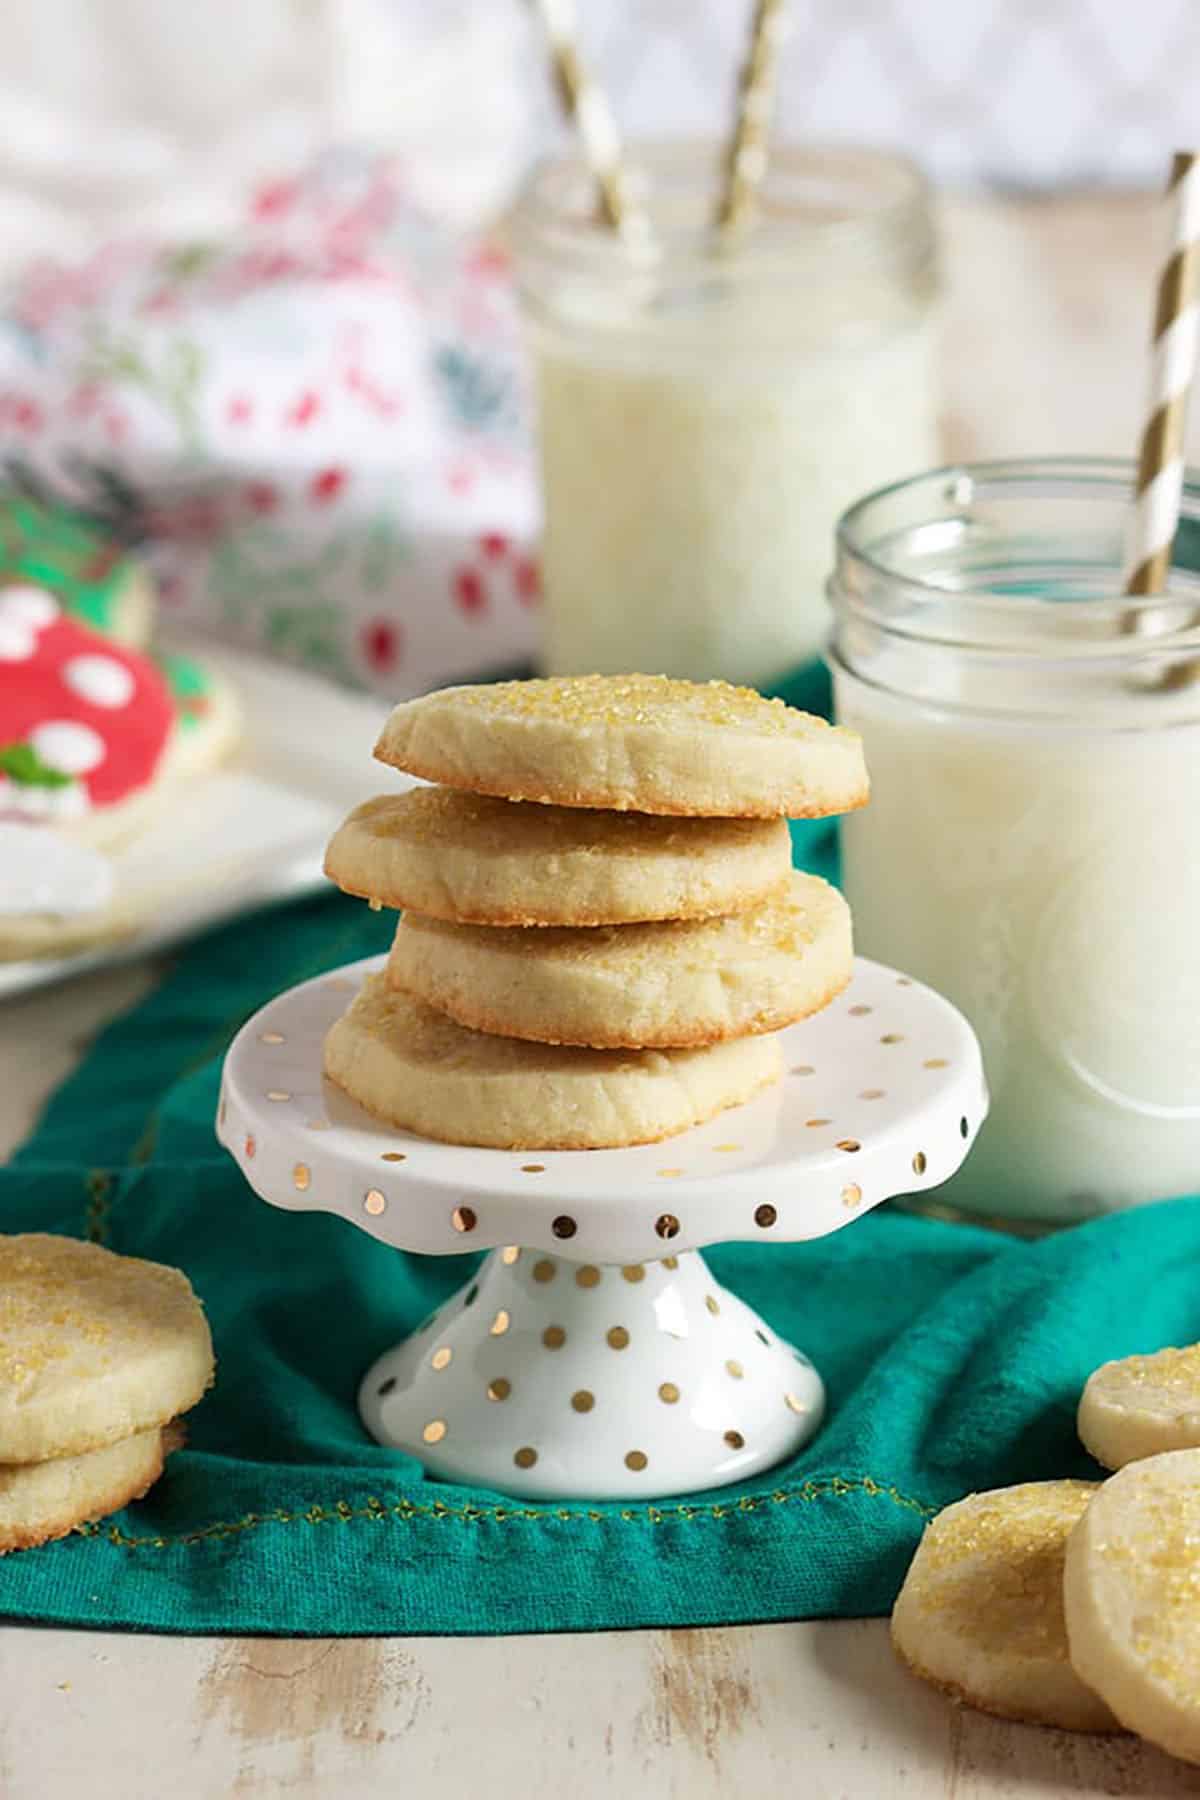 Slice and bake sugar cookies on a cupcake stand placed on a green napkin with glasses of milk in the background. The sugar cookies are stacked on top of each other.